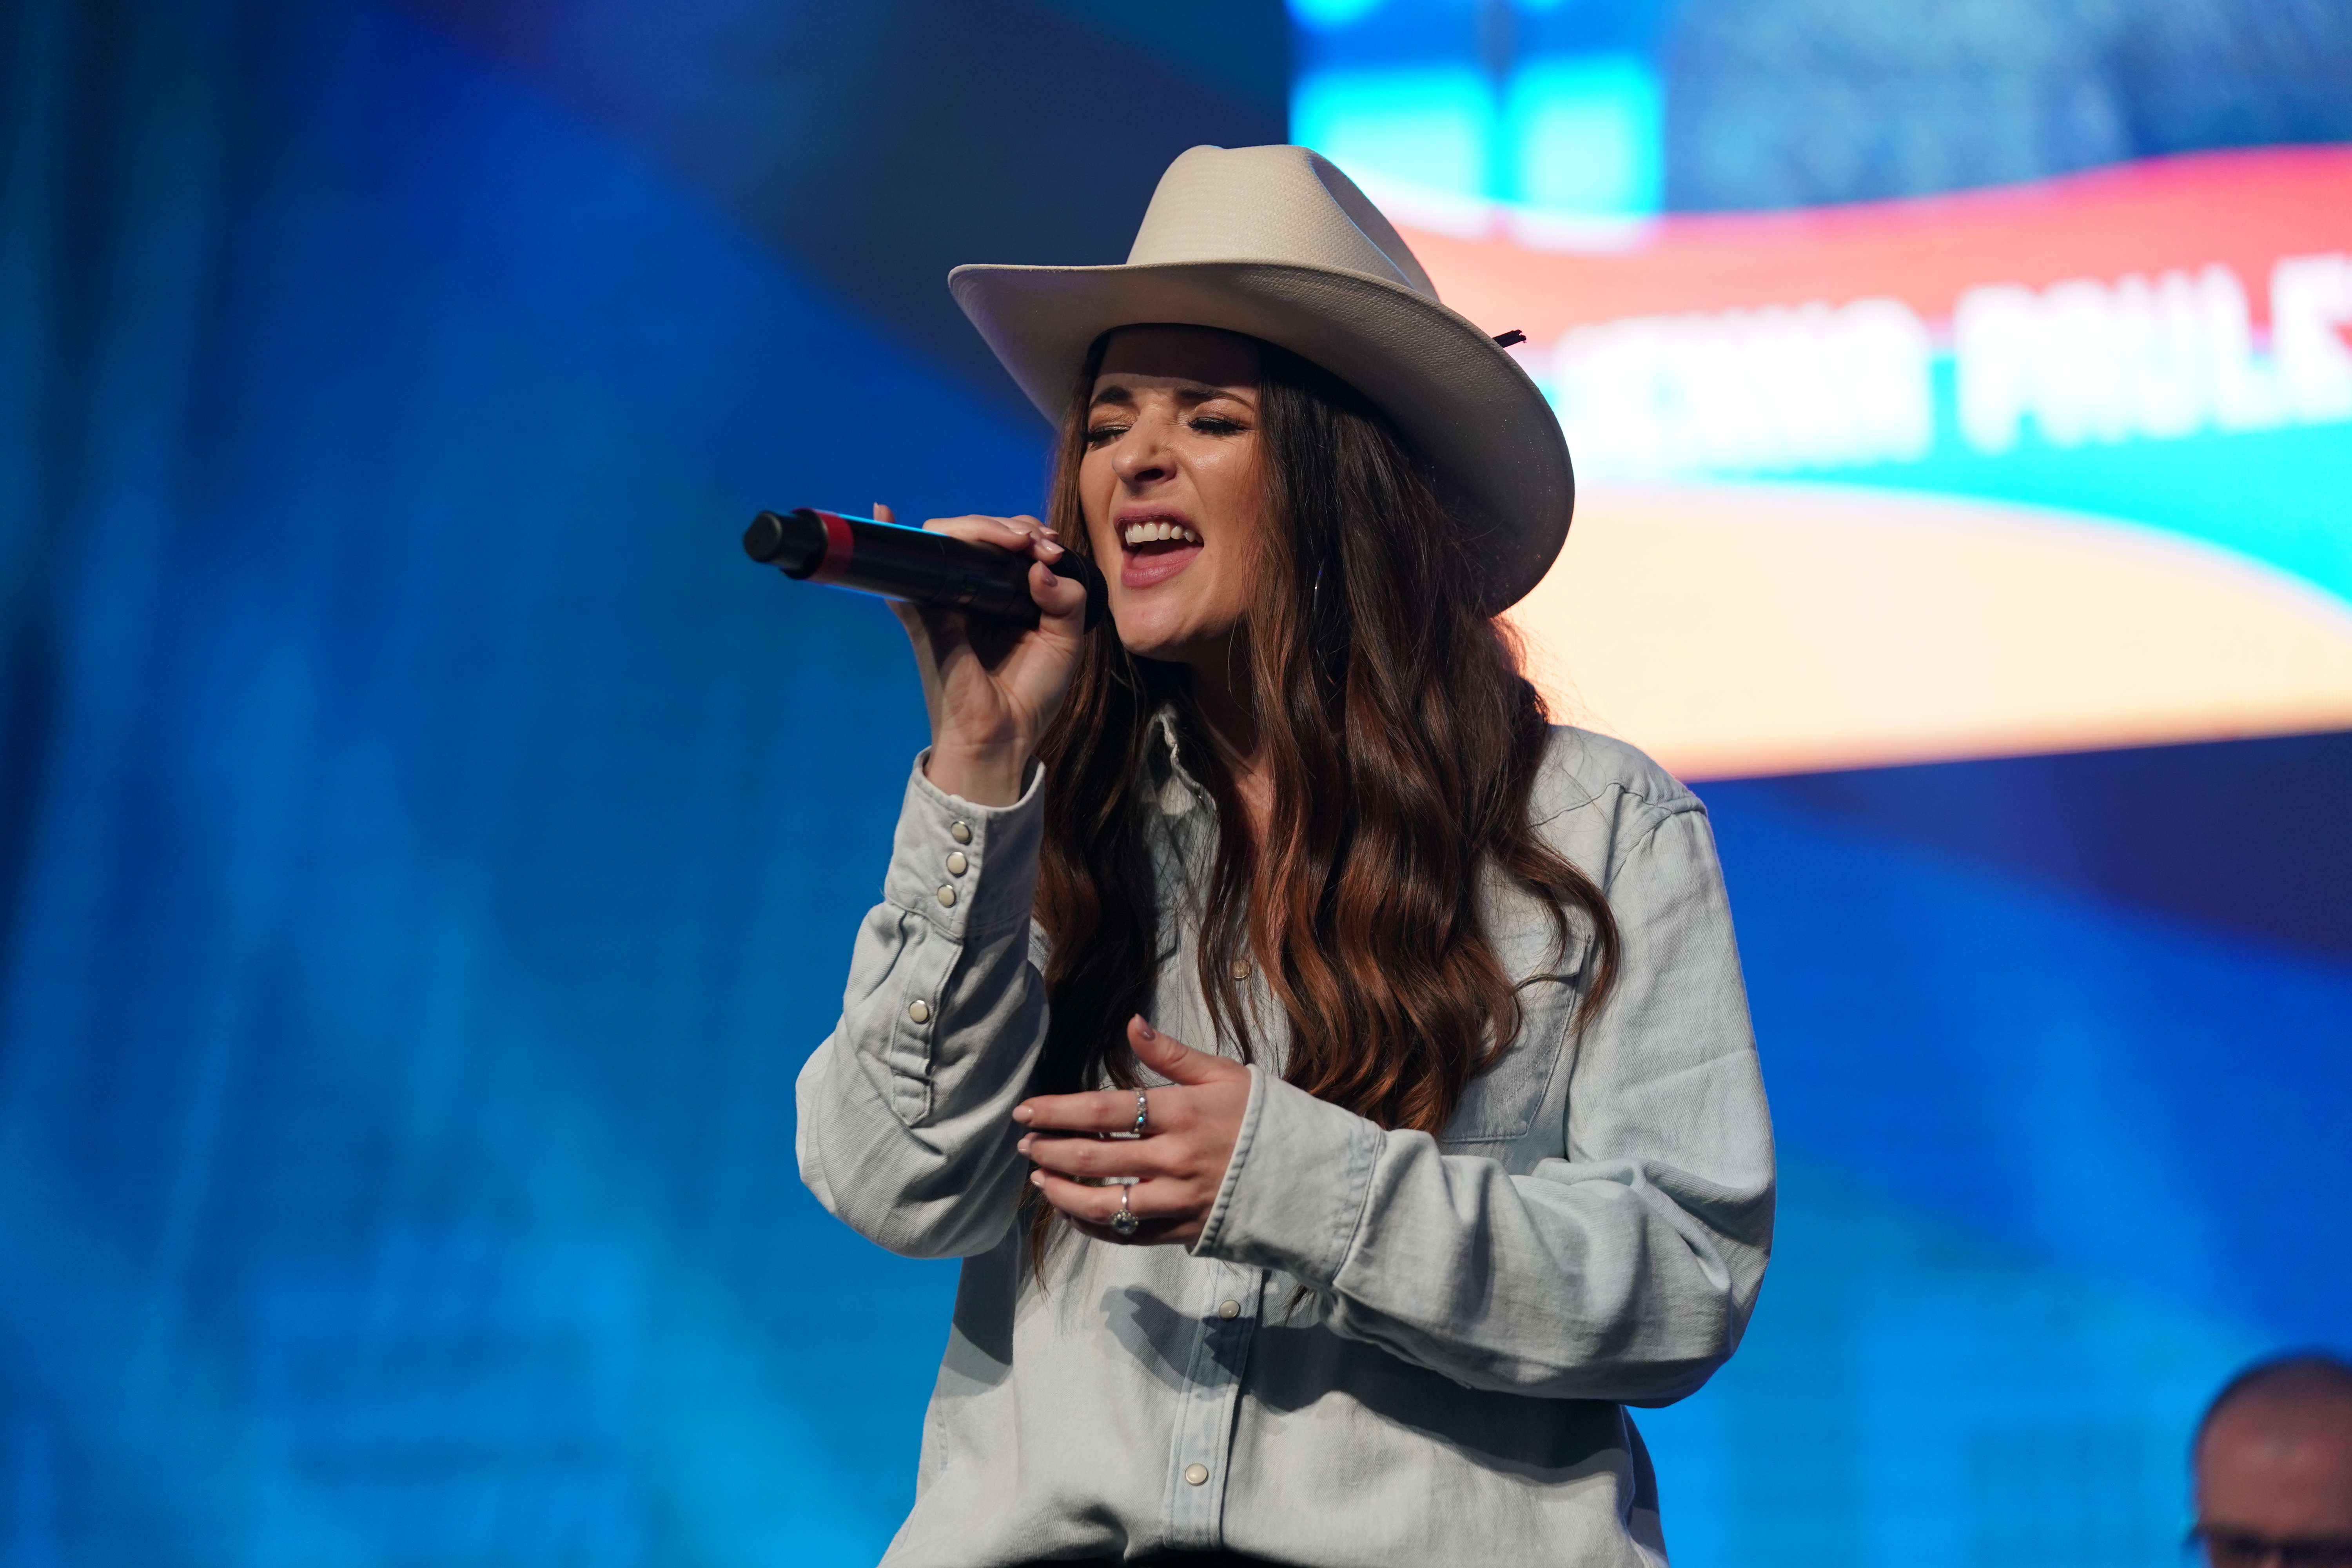 Jenna Paulette Opens Up About New Single “Wild Like The West” and Her Texas Roots